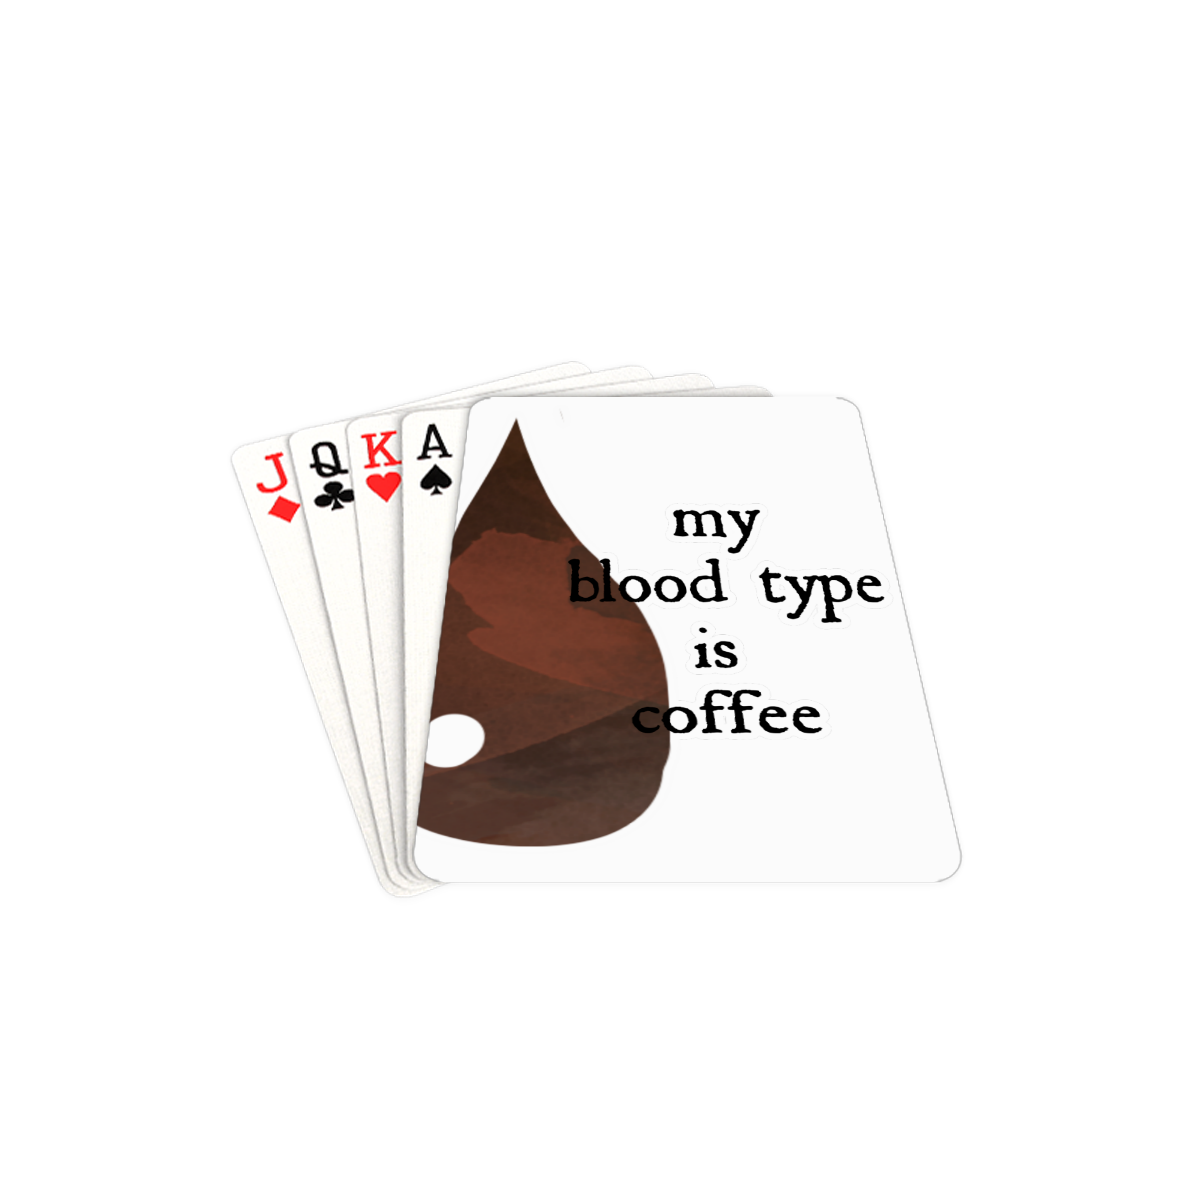 My blood type is coffee! Playing Cards 2.5"x3.5"